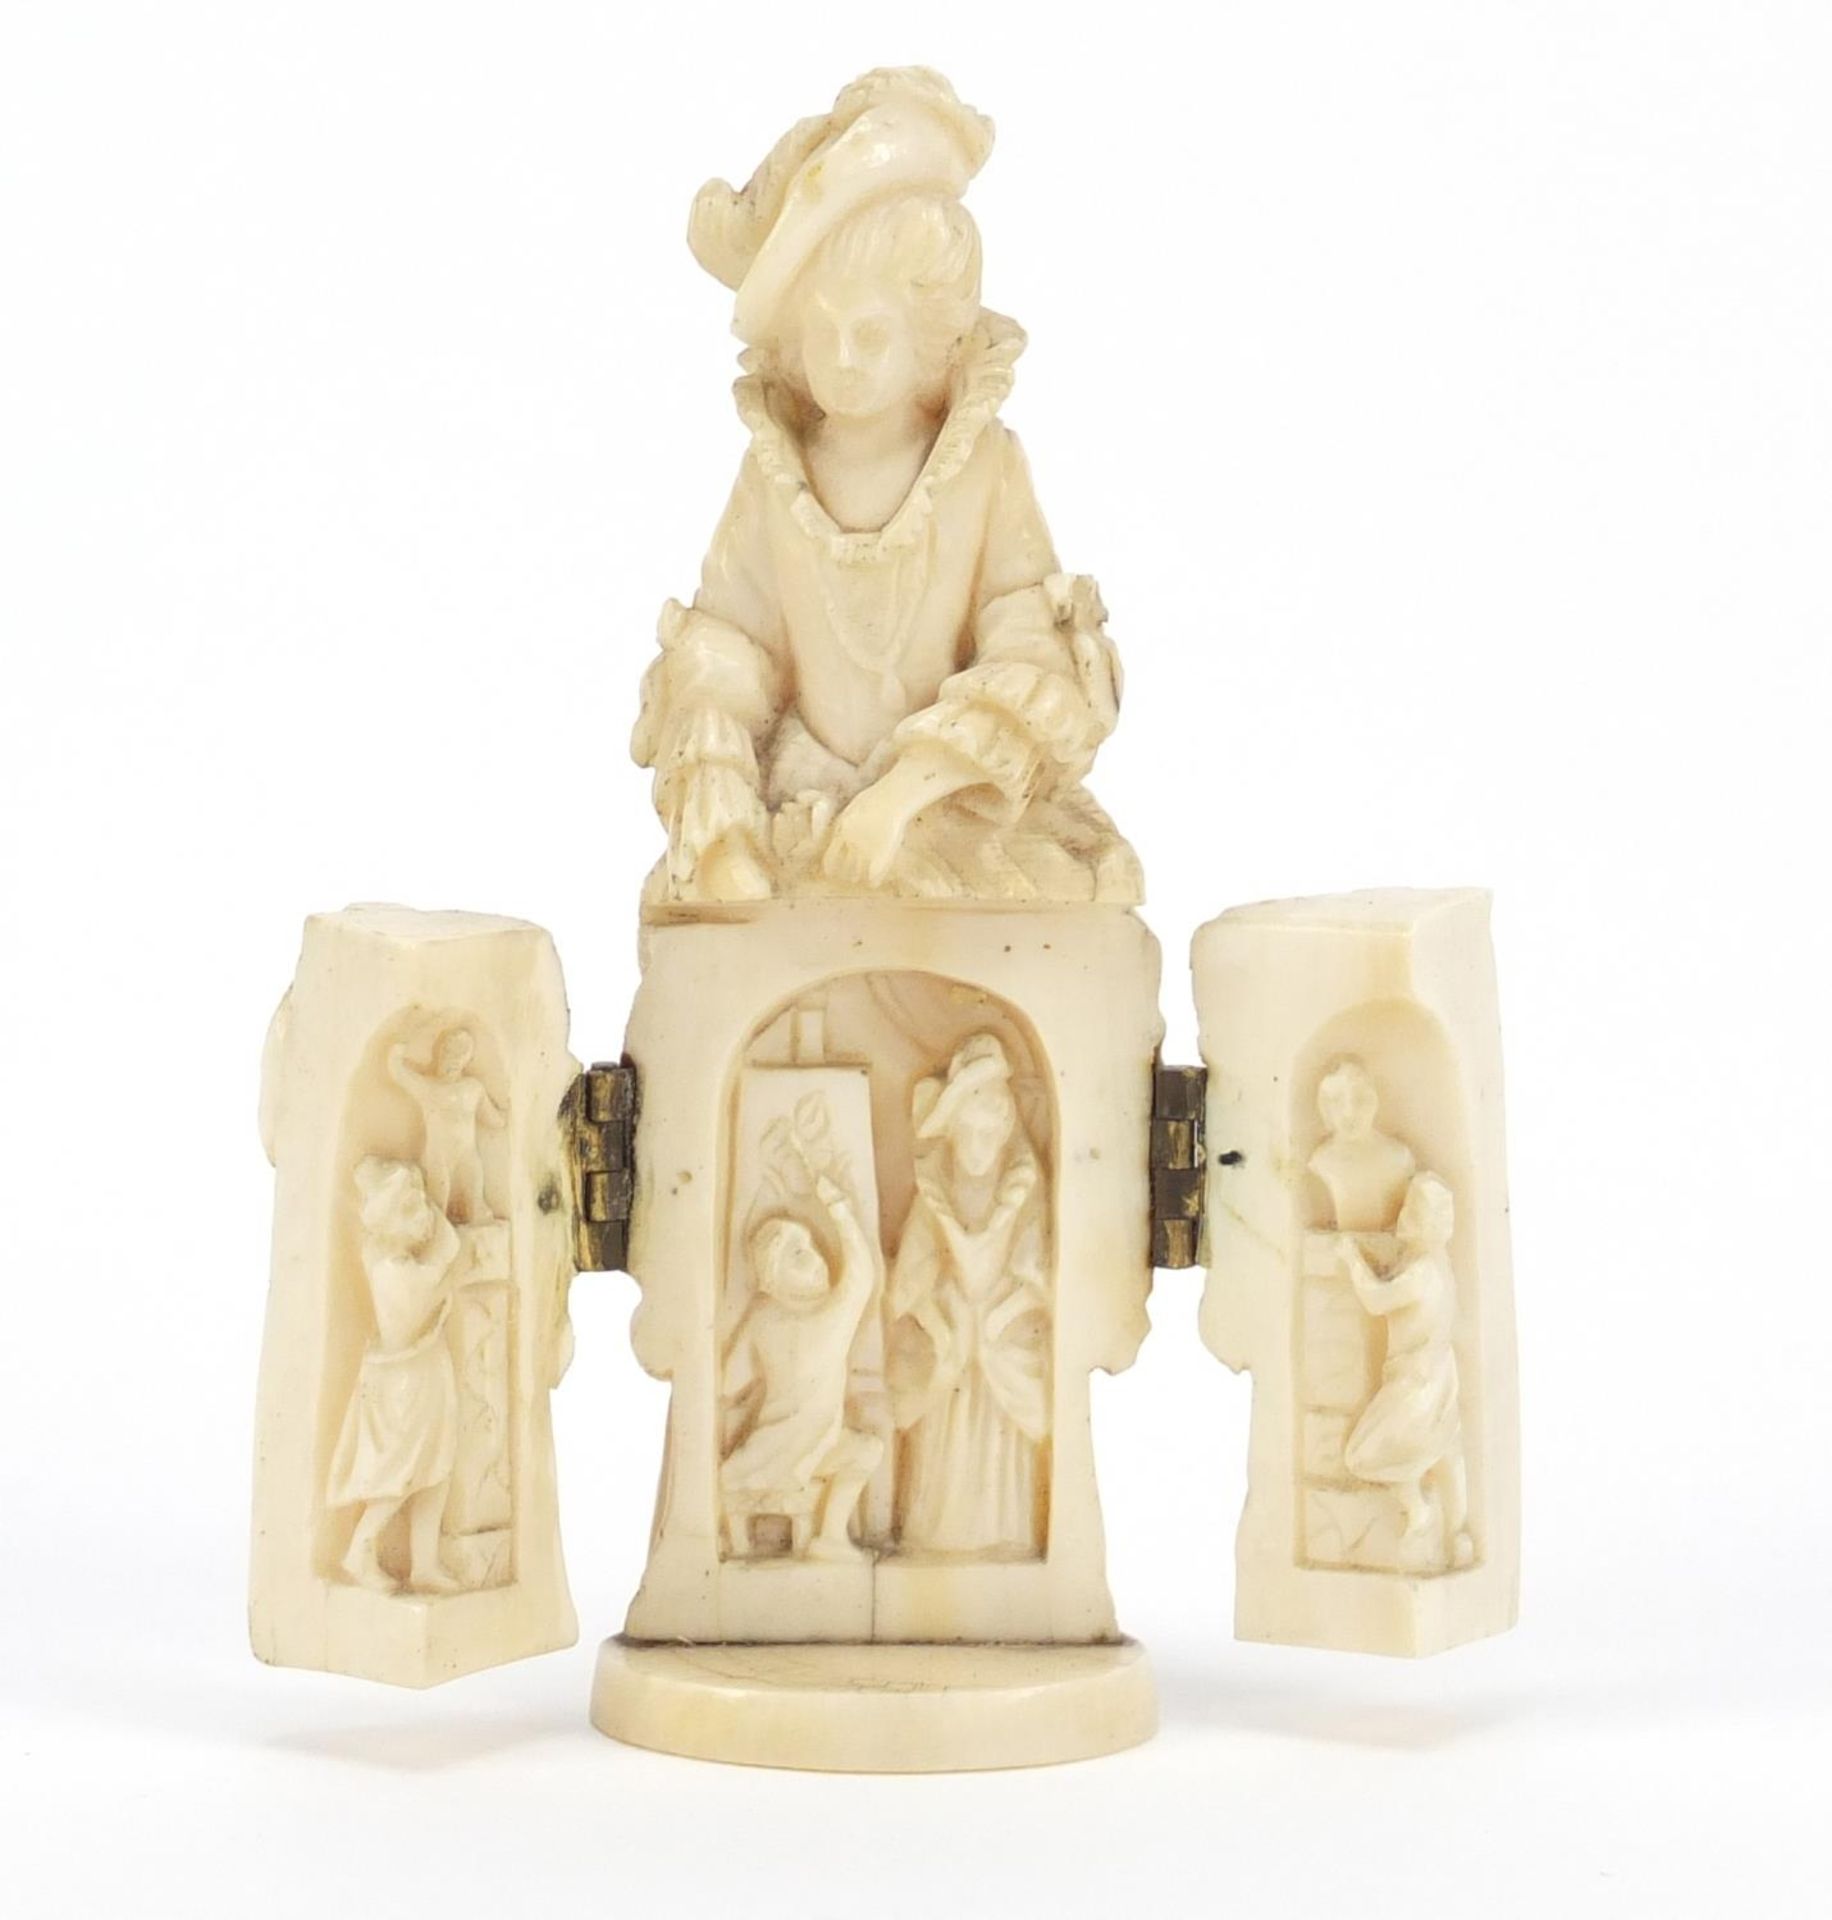 19th century French Dieppe carved ivory tryptych figure, 9cm high